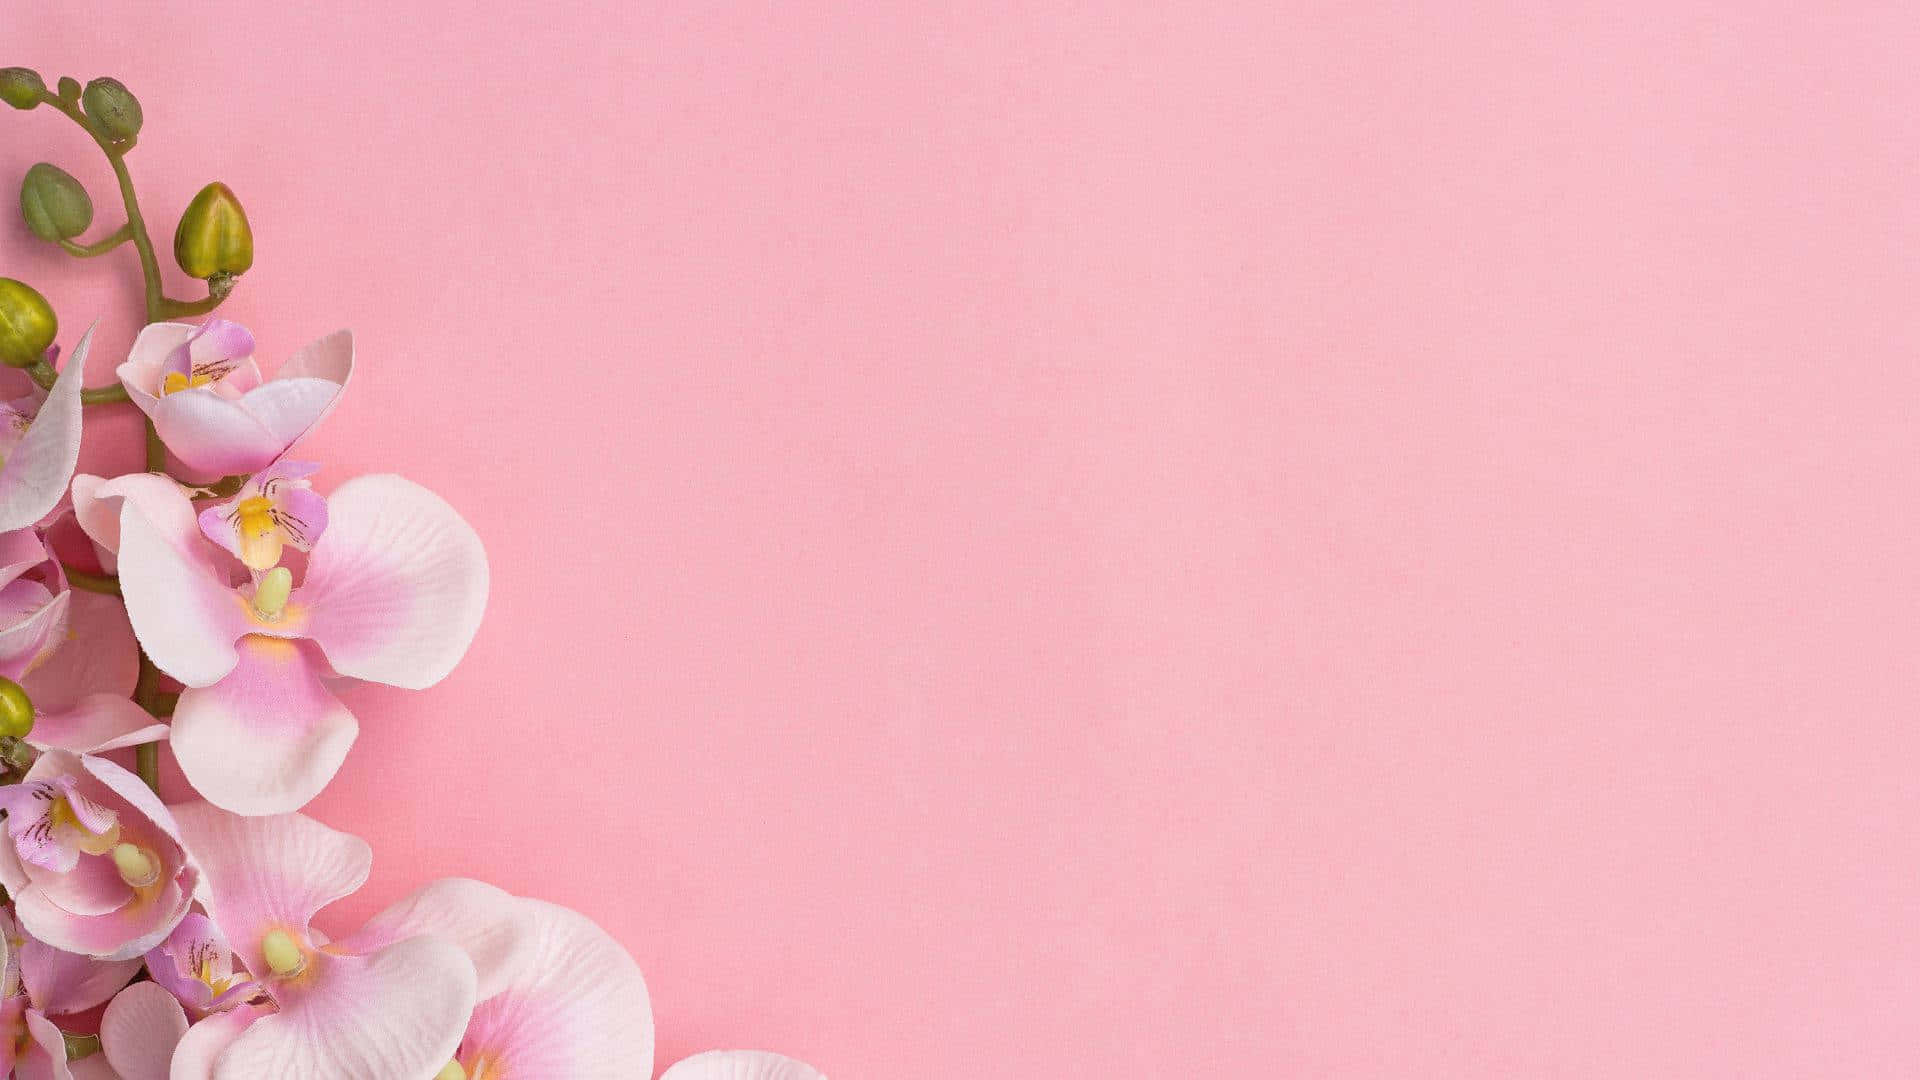 Soft and Sweet, A Pretty Baby Pink Background